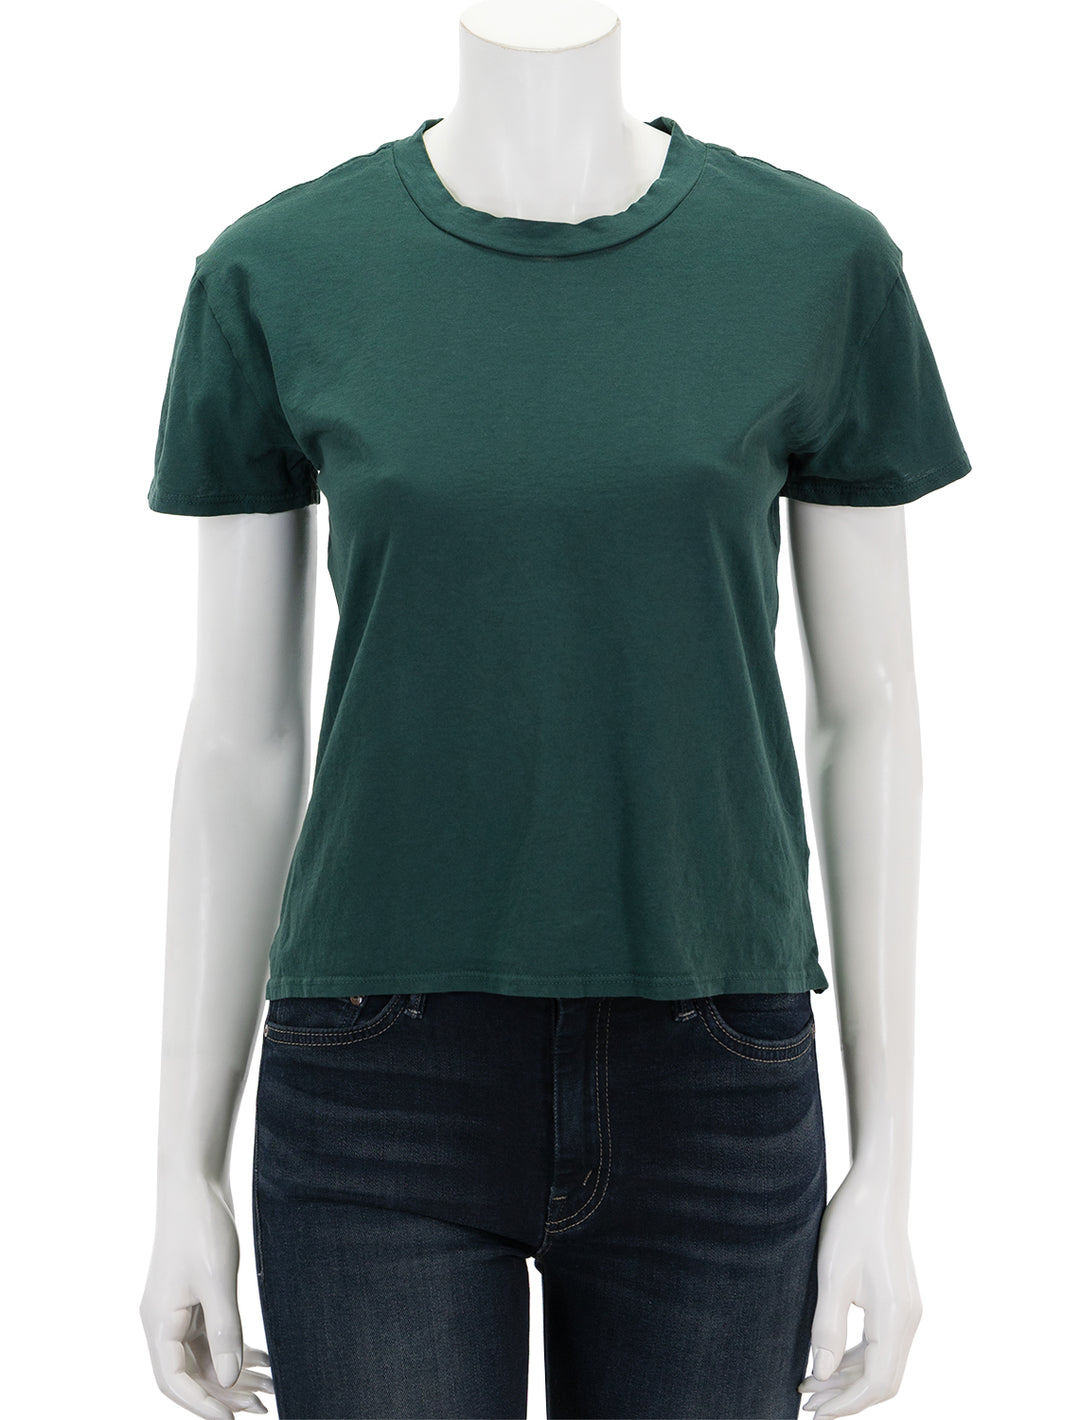 Front view of Perfectwhitetee's harley tee in pine.